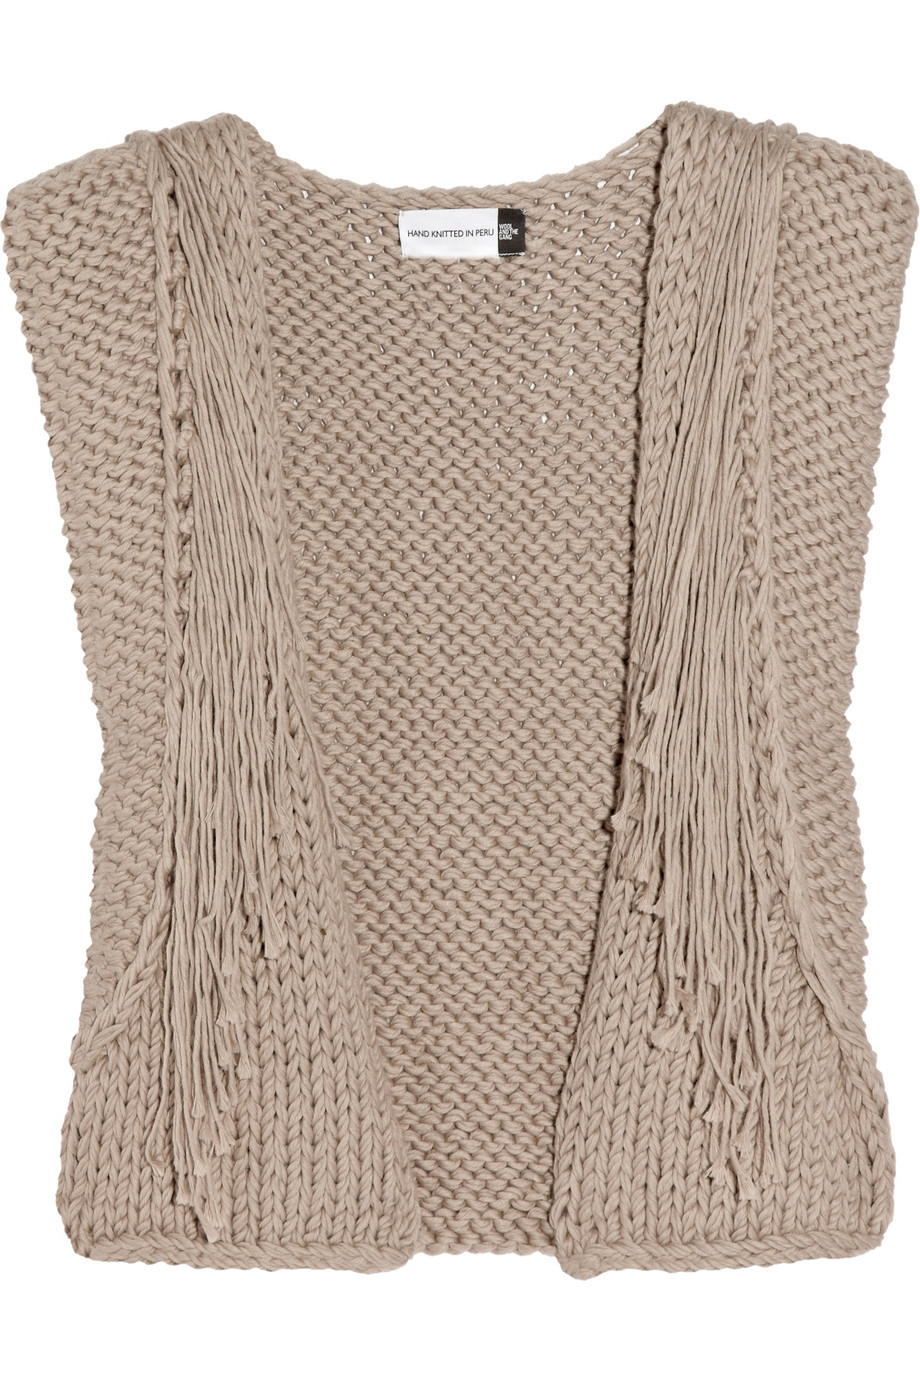 Wool And The Gang Lil Indiana Joe Hand-knitted Cotton Vest in Brown | Lyst